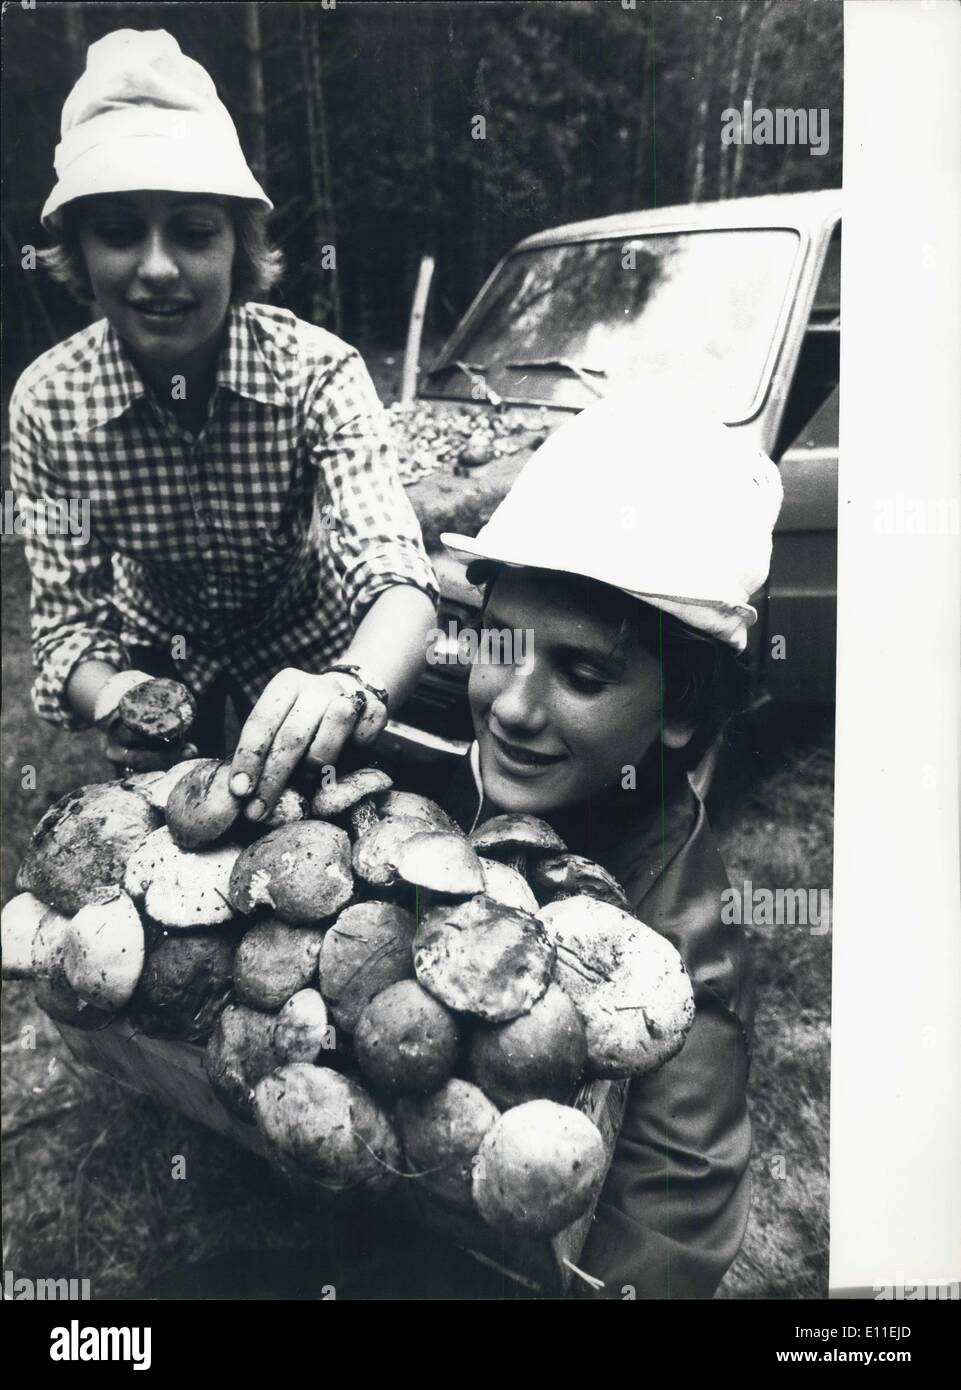 Sep. 24, 1977 - This year's frequent rains brought an extremely rich crop of mushrooms in Poland's forests. A basketfull of boletus picked during one hour in a forest of the Olsztyn province. Stock Photo